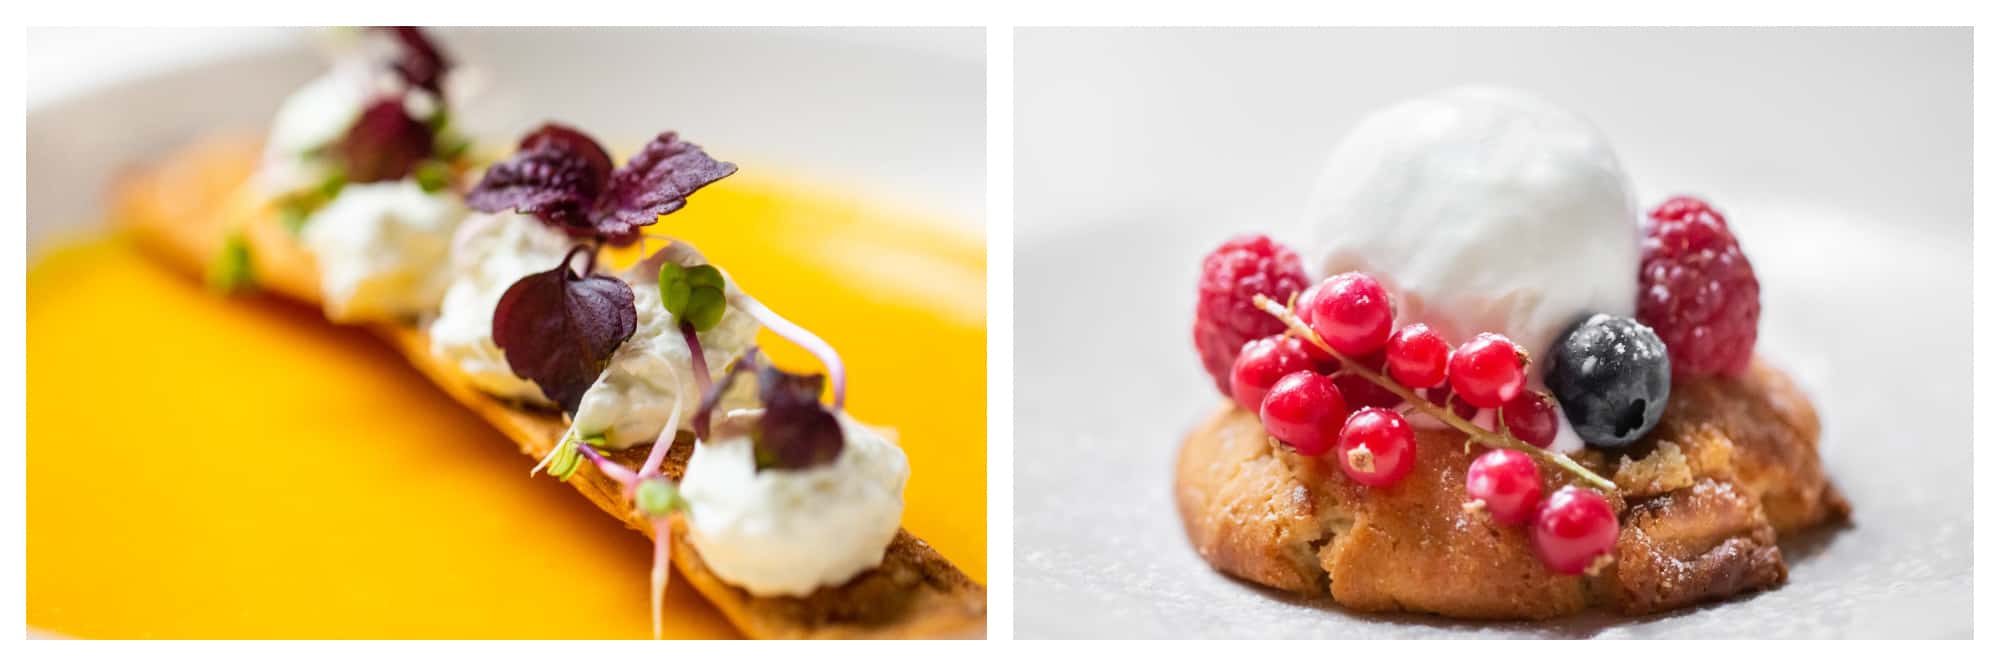 On left: A delicate biscuit sits in a pool of golden fruit coulis, dotted with cream and fresh herbs. On right: A fresh cookie is adorned with a generous scoop of vanilla ice cream and encircled by a crown of fresh, vibrant raspberries, blueberries, and currents. 